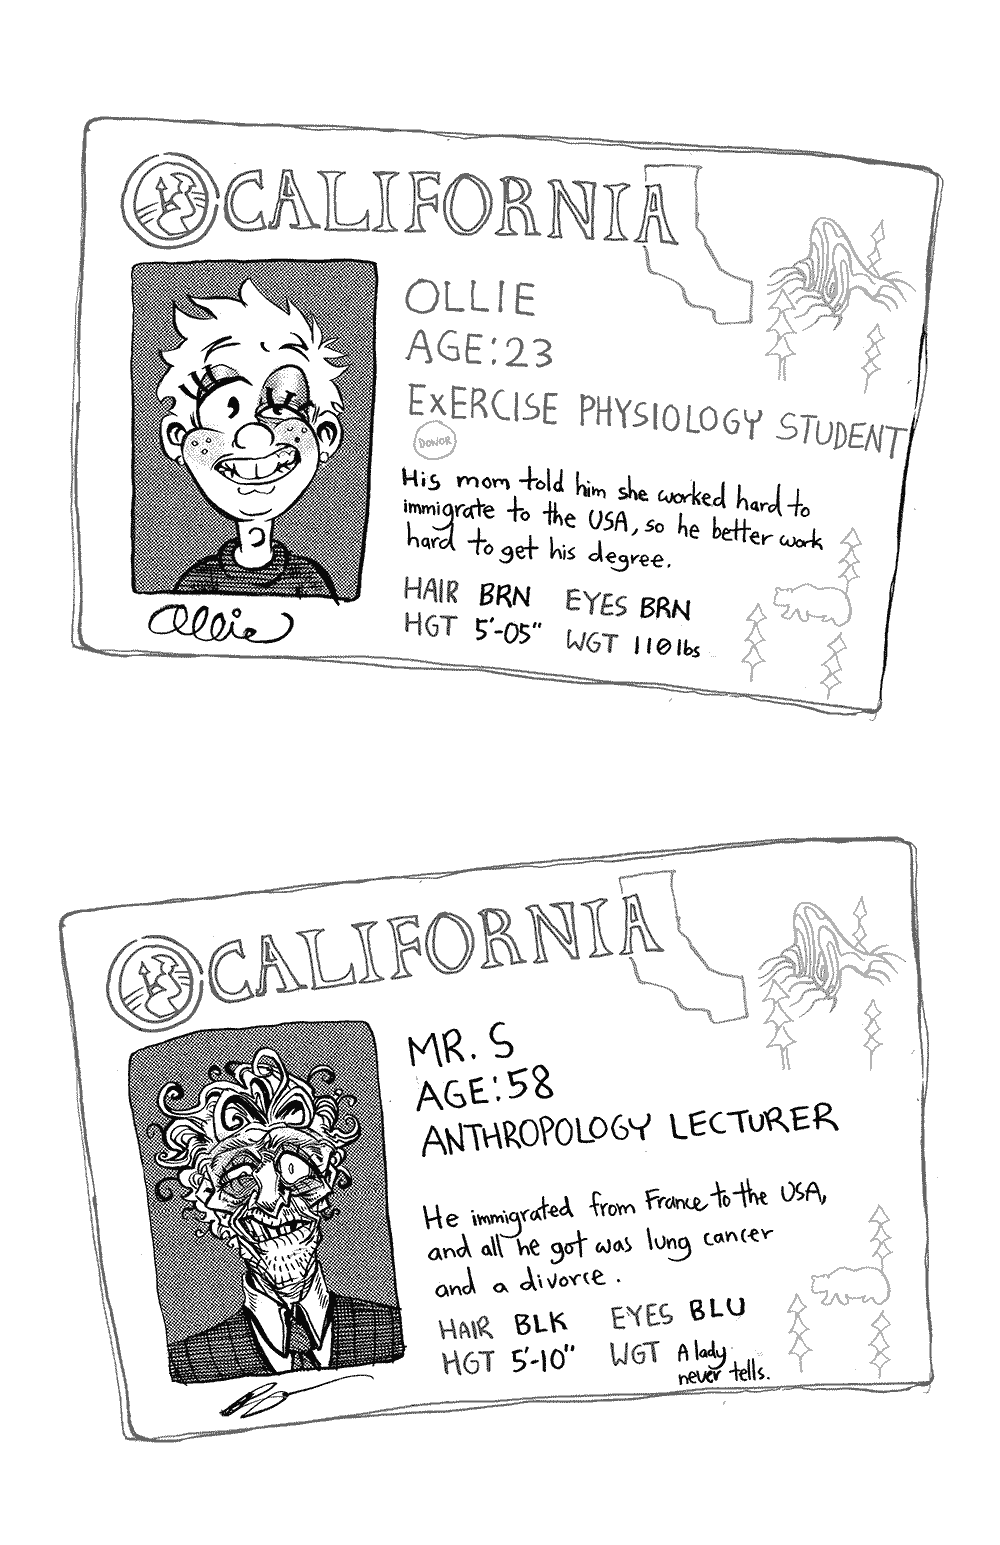 The character page of hooky, displaying Ollie and Basile's California ID cards.  Ollie is 23, and an exercise Physiology student.  He's 5 feet 5 inches, hair and eyes are brown, and weight is 110 lbs.  His mom told him she worked hard to immigrate to the USA, so he better work hard to get his degree.  Mr. S is 58.  He's an anthropology lecturer.  His hair is Black, his eyes are blue, and his height is 5 foot 10 inches.  His weight?  A lady never tells.  He immigrated from france to the USA, and all he got was lung cancer and a divorce.